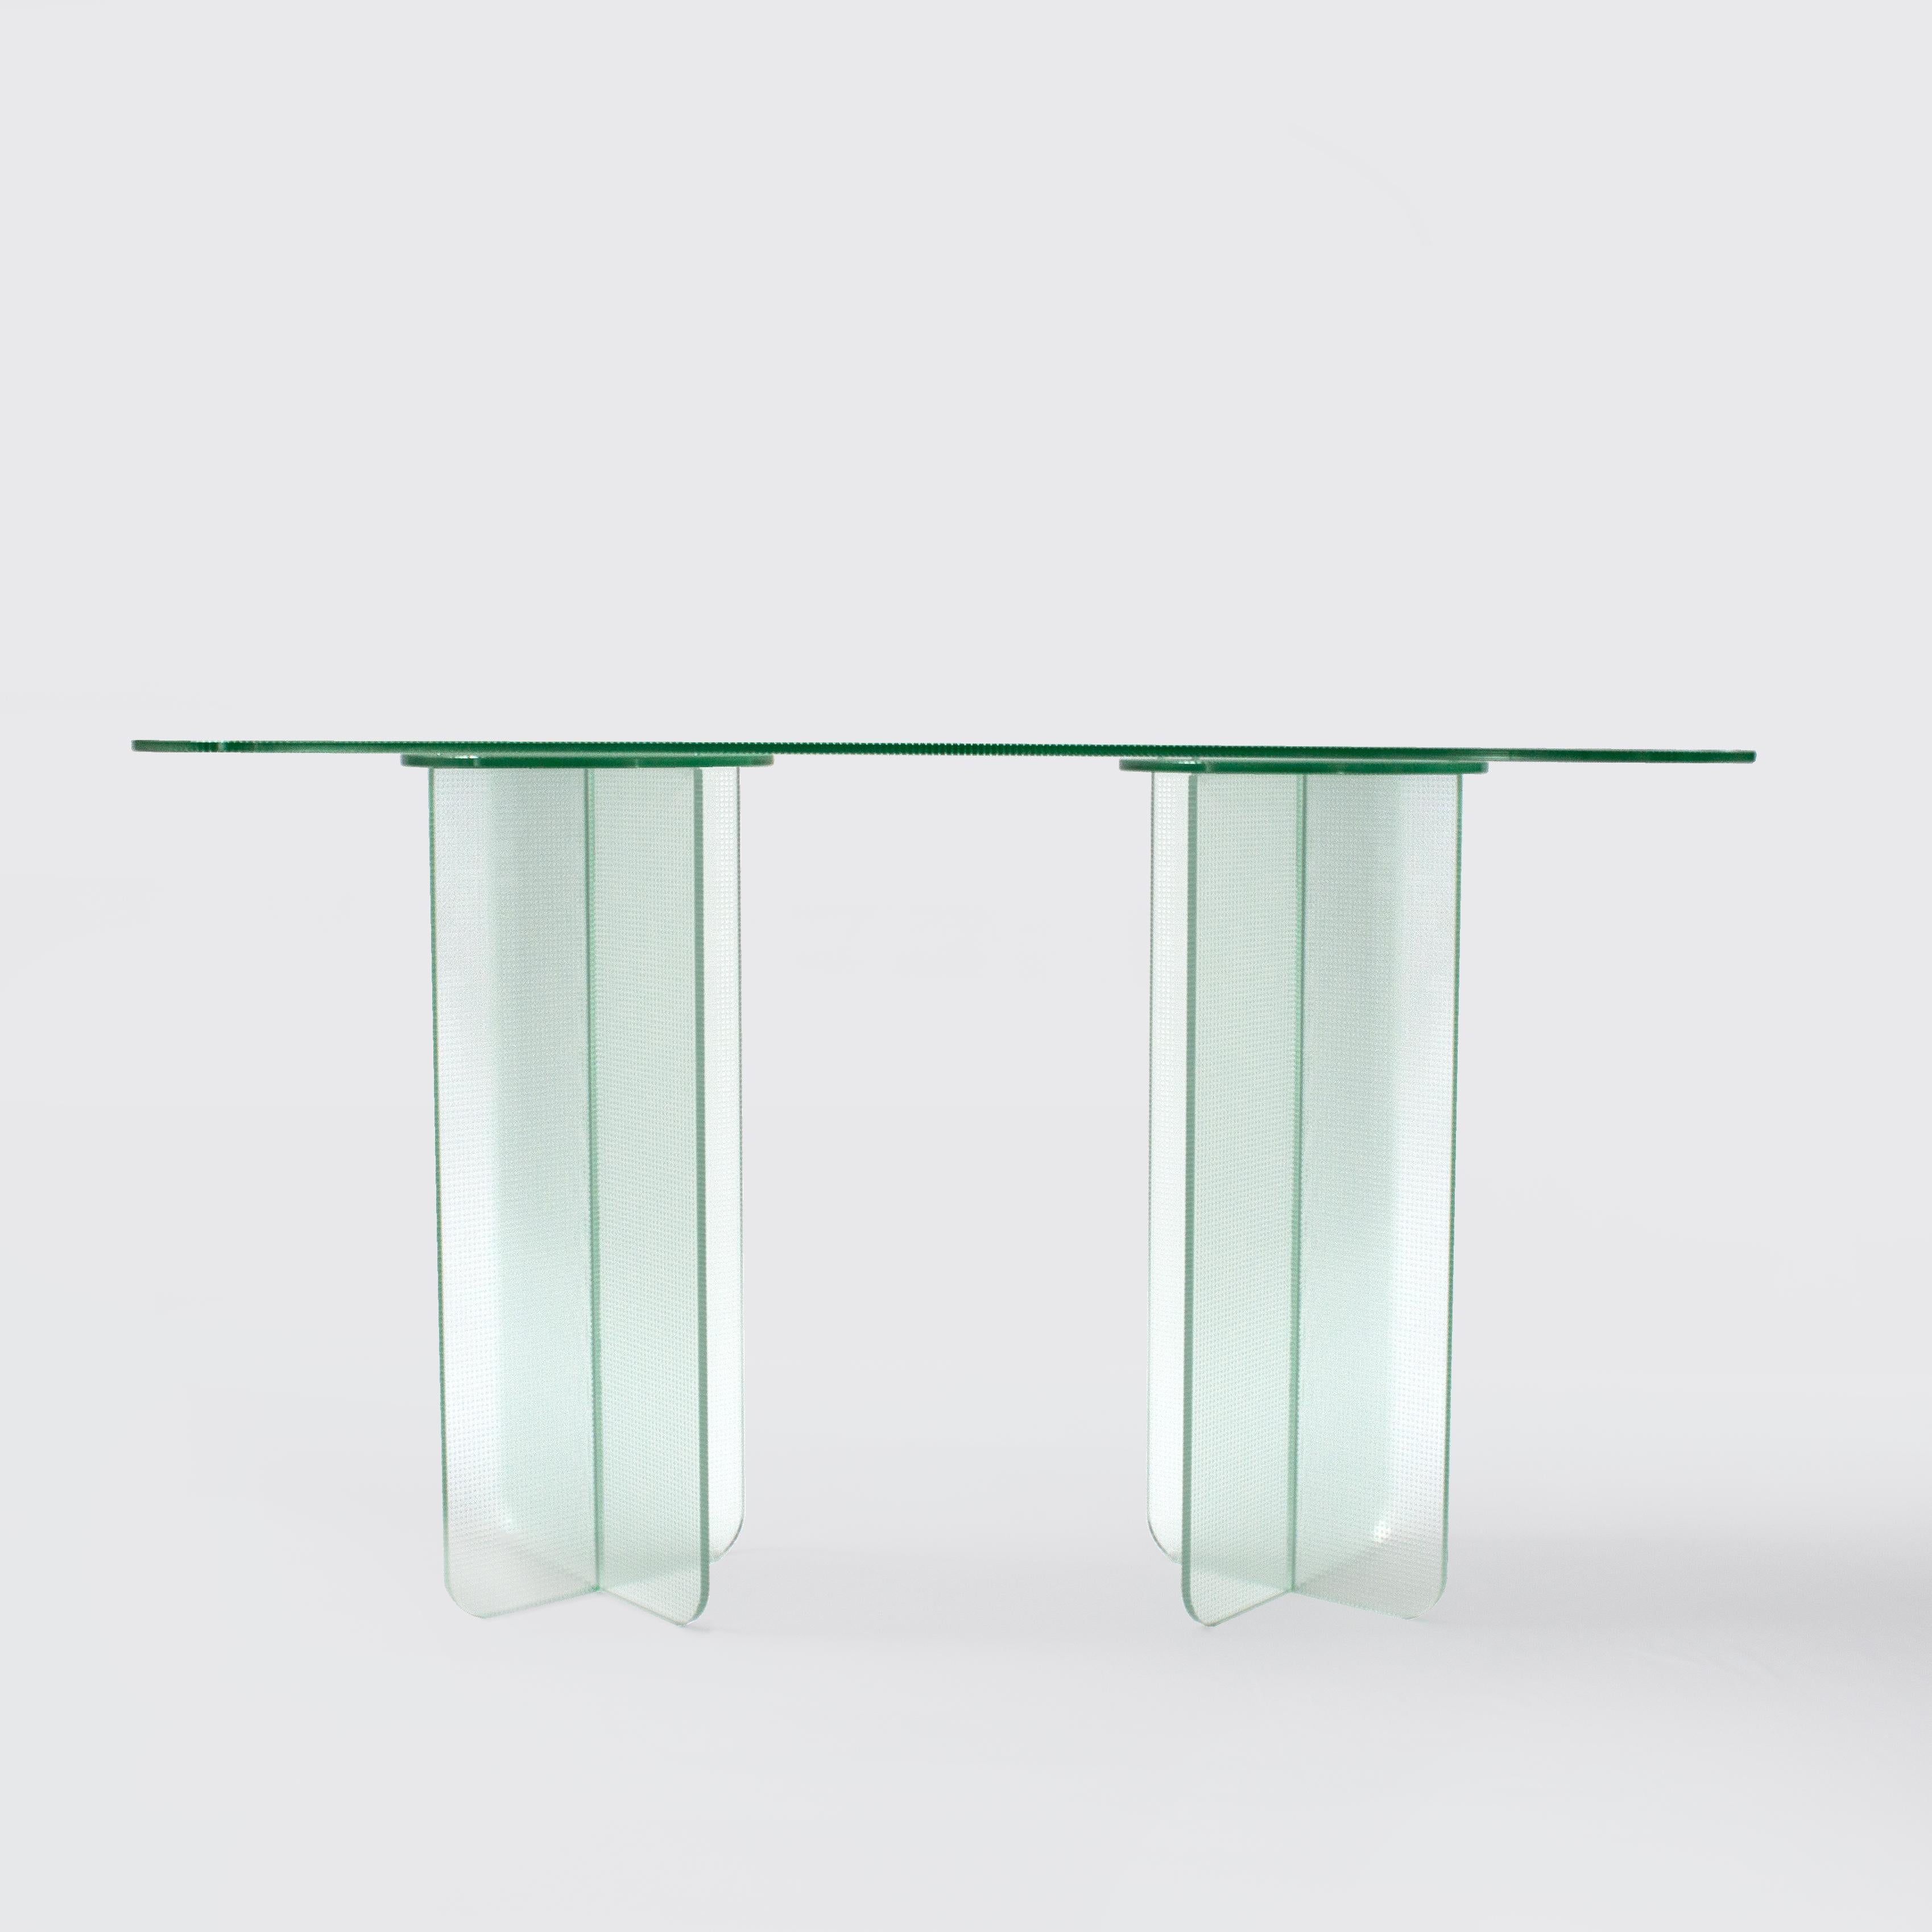 Float collection explores transparent form with a subtle overlay of texture, transforming simple tables into light shape-shifting pieces. Made entirely of glass Float’s seamless form changes depending on its viewing angle, with material opacity,